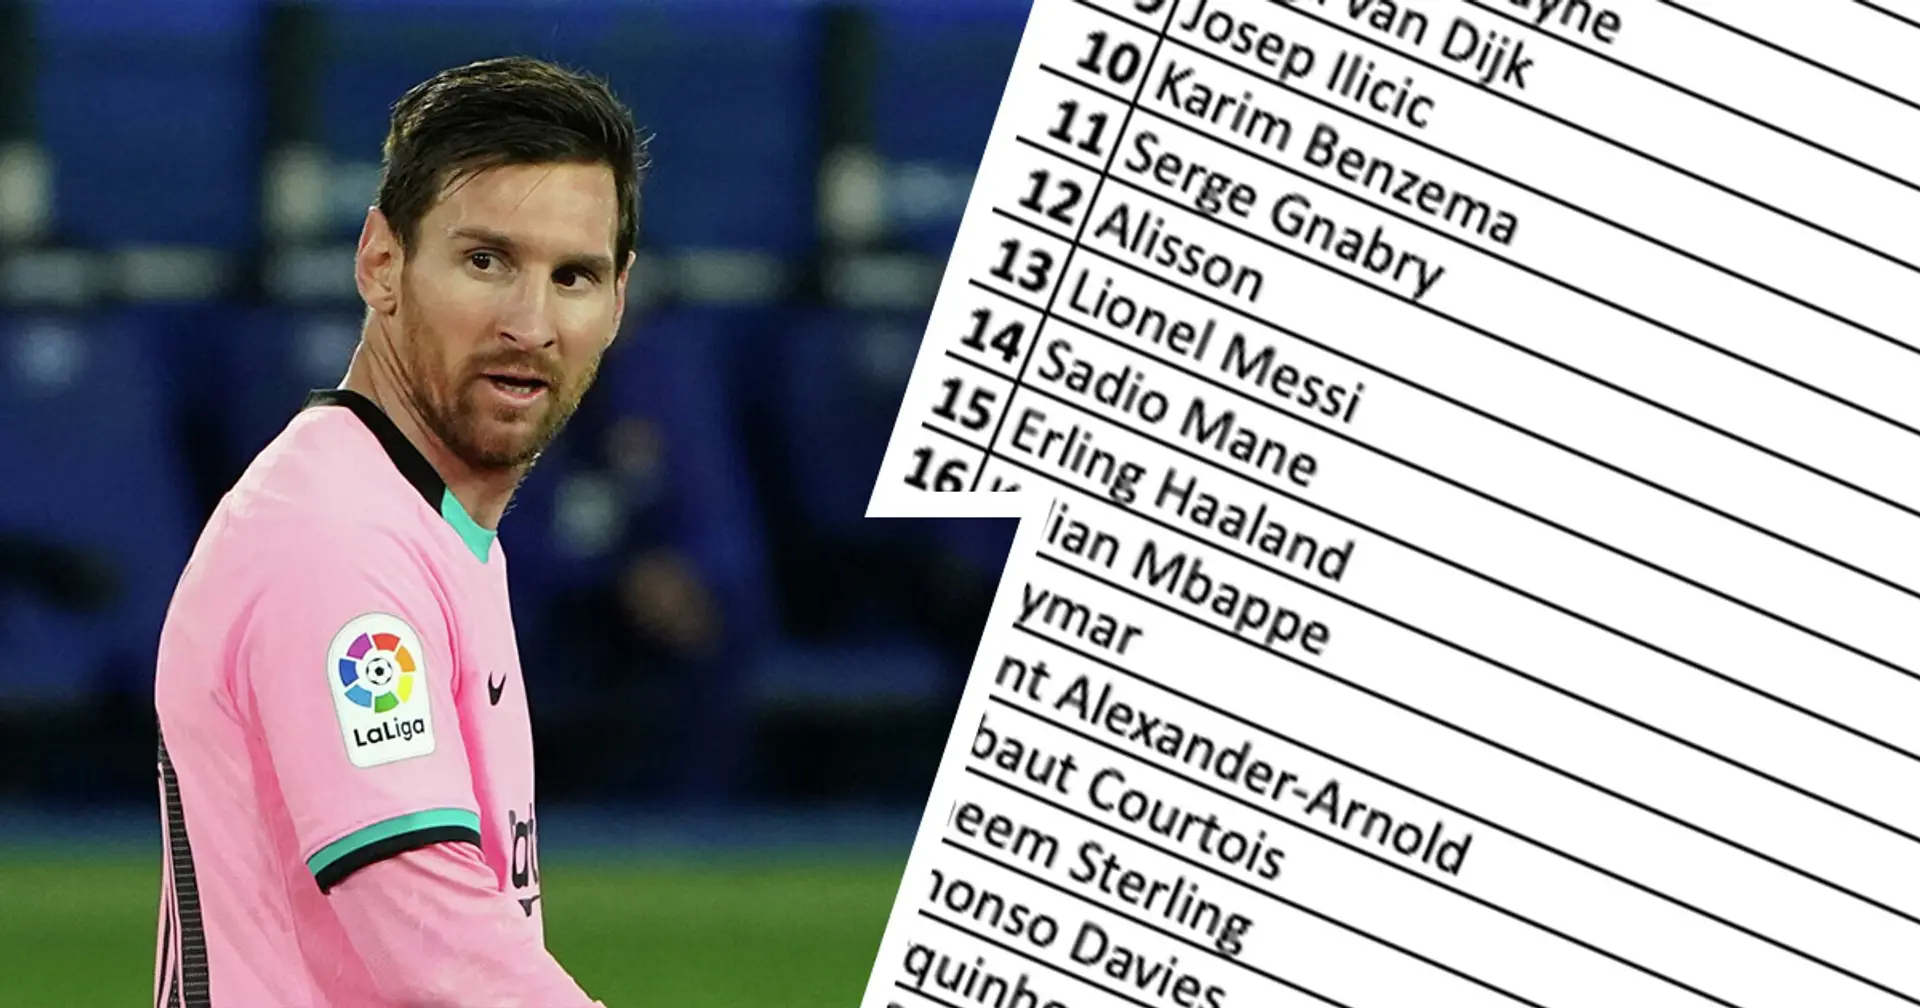 Messi in 13th, 4 spots below Ilicic: journalist reveals bold vote for Goal best 25 footballers ranking